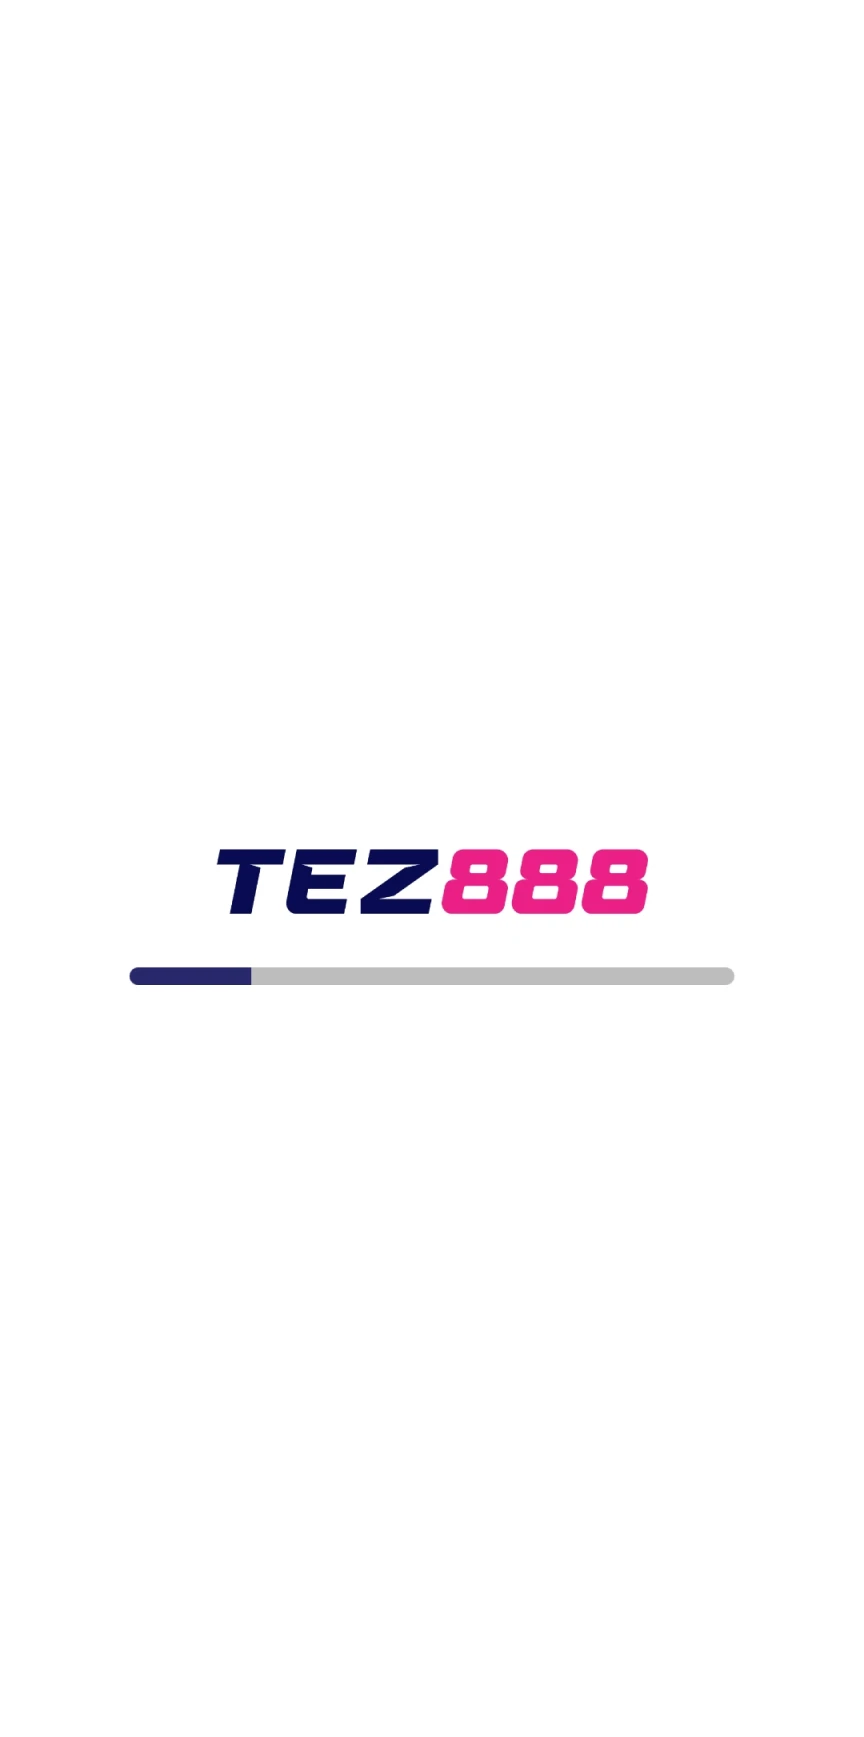 Install the Tez888 application for iOS.